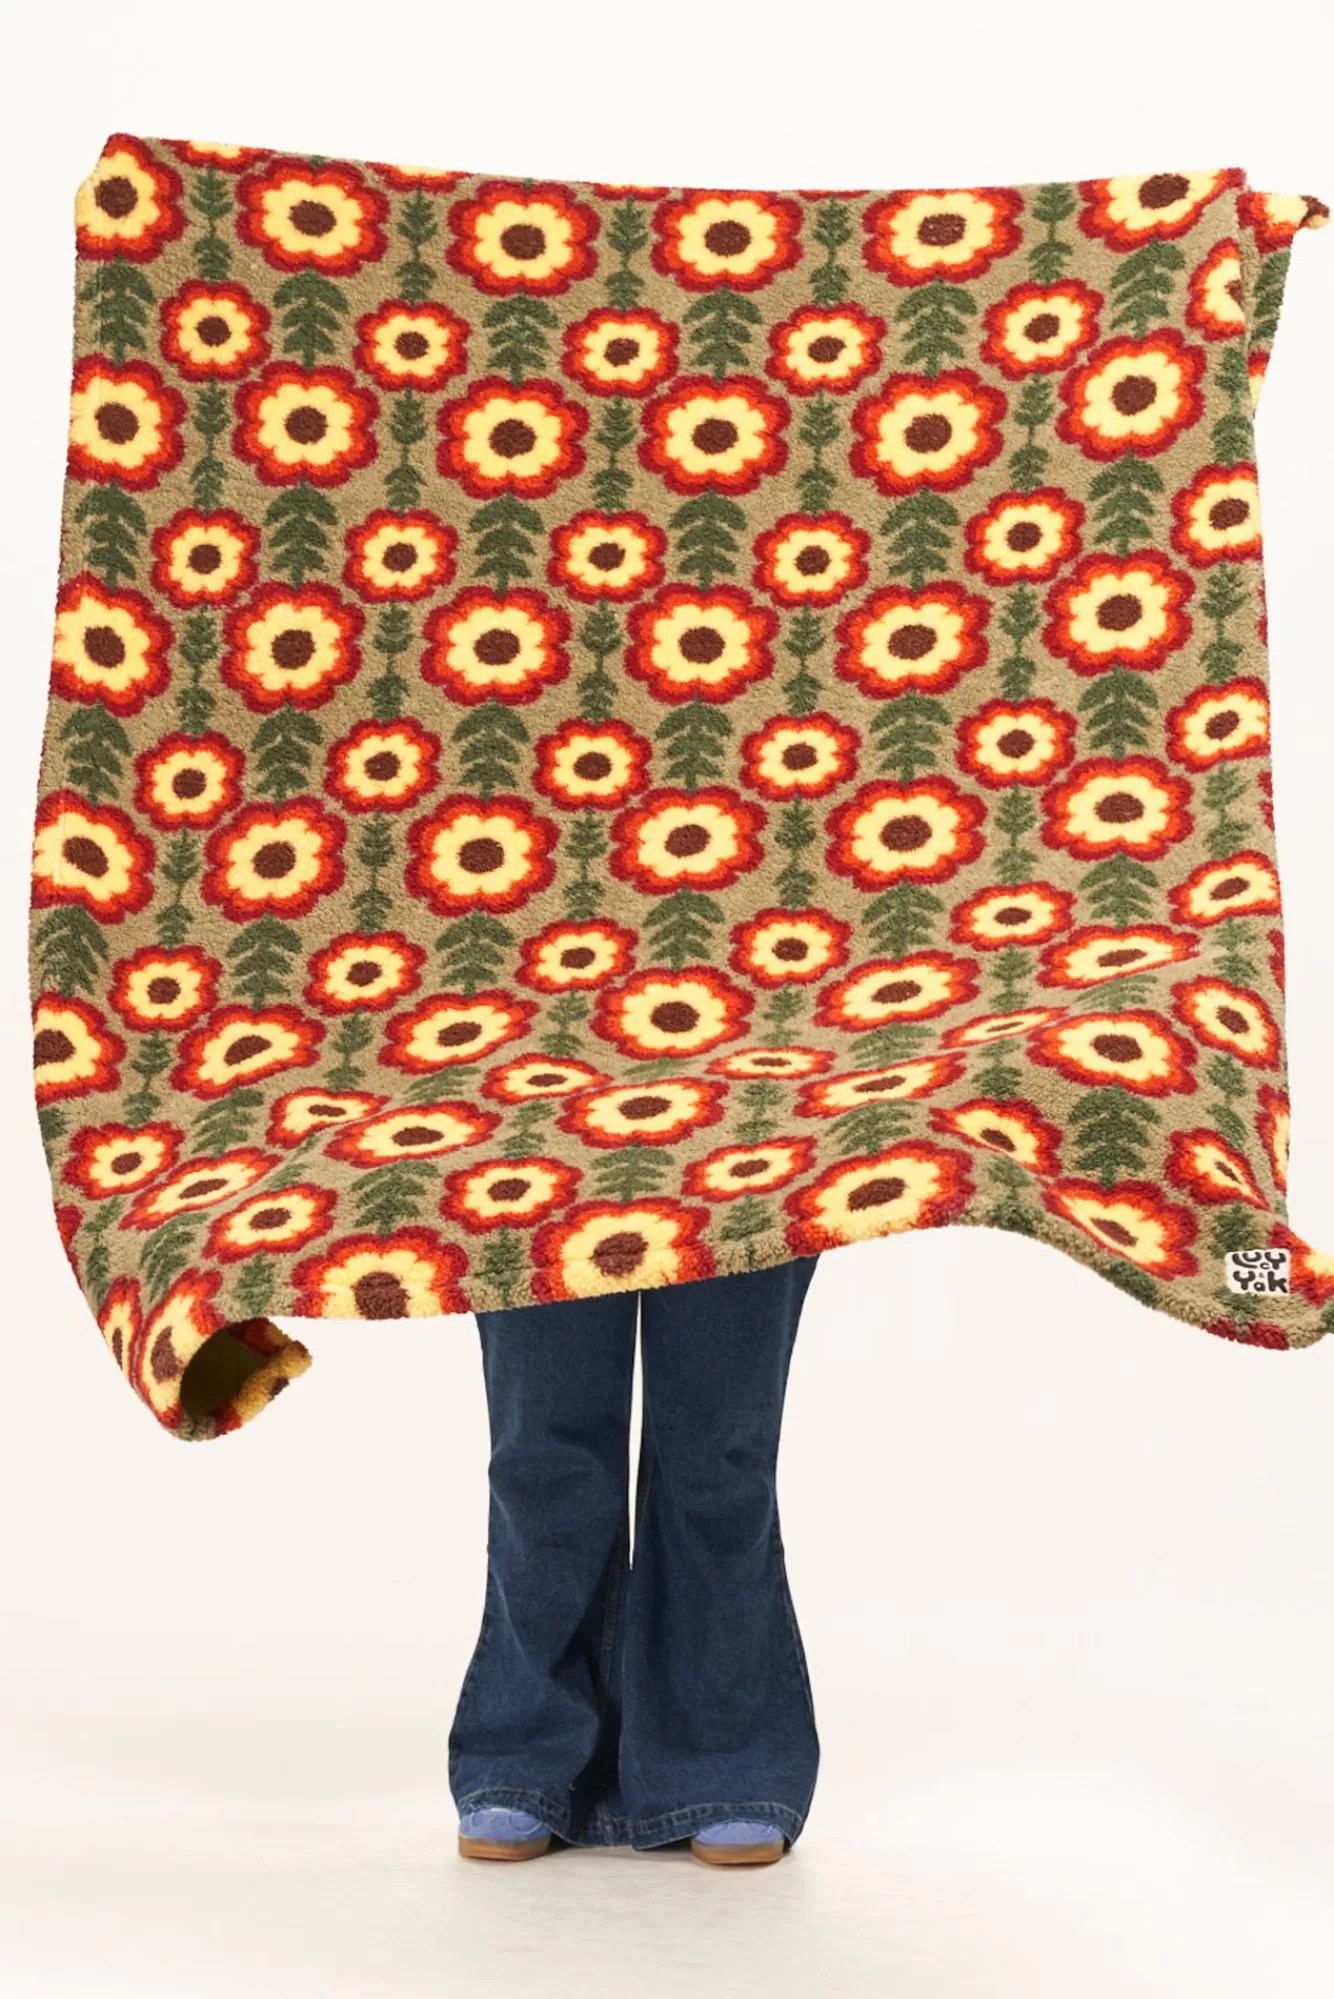 Borg Blanket: Recycled Bottles - Flowers In A Row-Lucy & Yak Best Sale